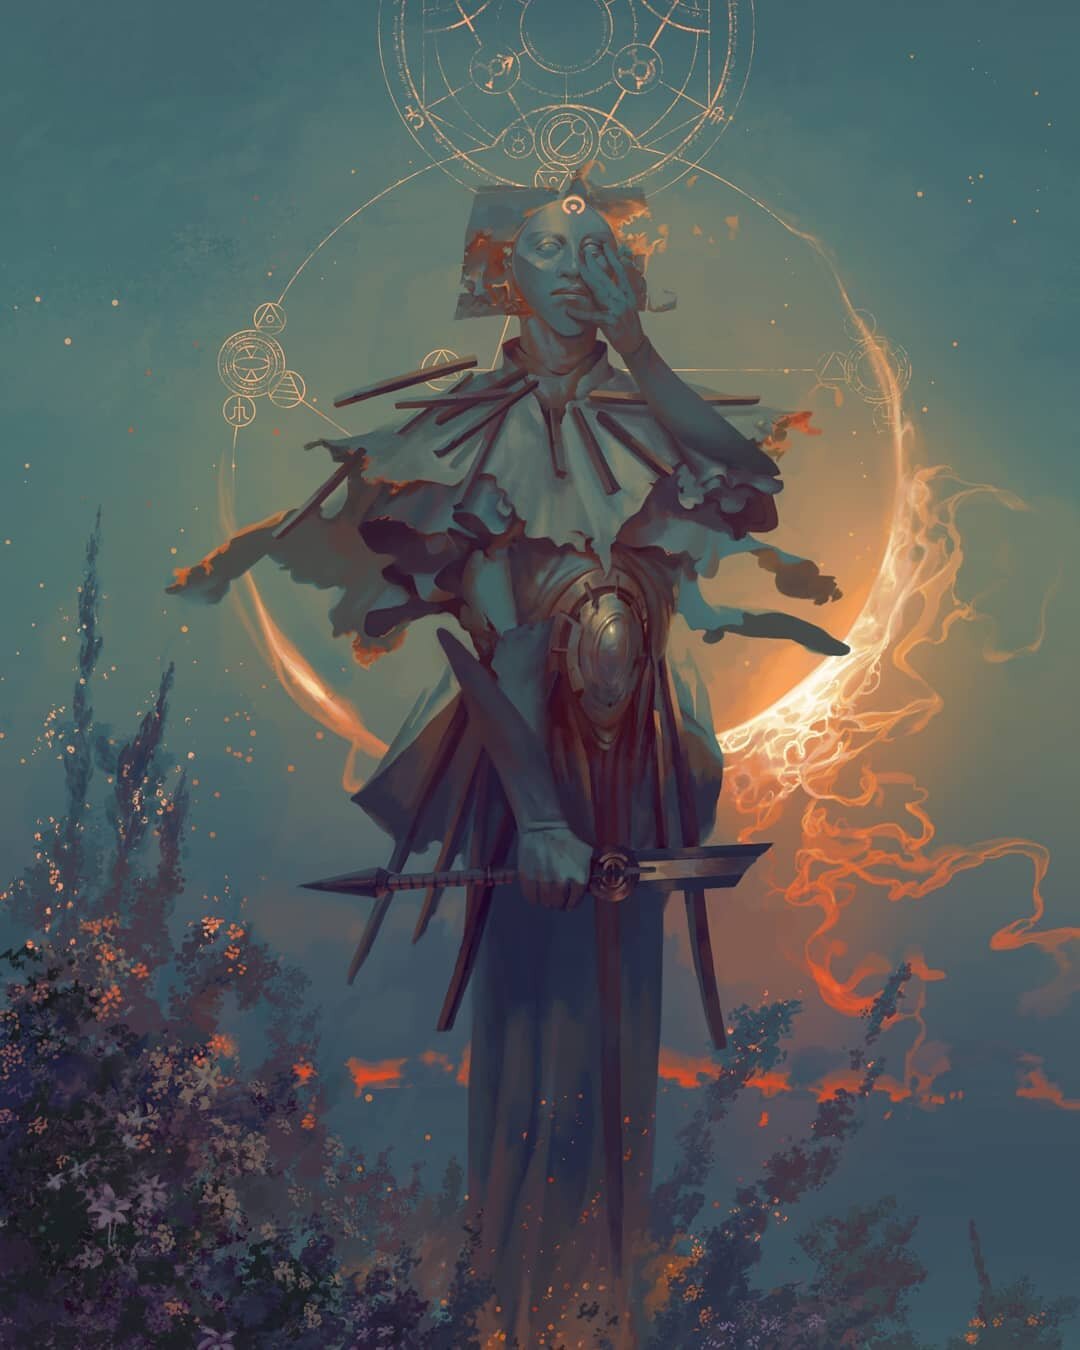 Samshiel, Angel of the Eclipse🌙 Swipe for details➡️ Last frame is by @aoxenuk😍
.
When the warm months brought work in the fields, Samshiel would head the effort. It was easy to spot him out there, his great stature loomed above the other workers, b